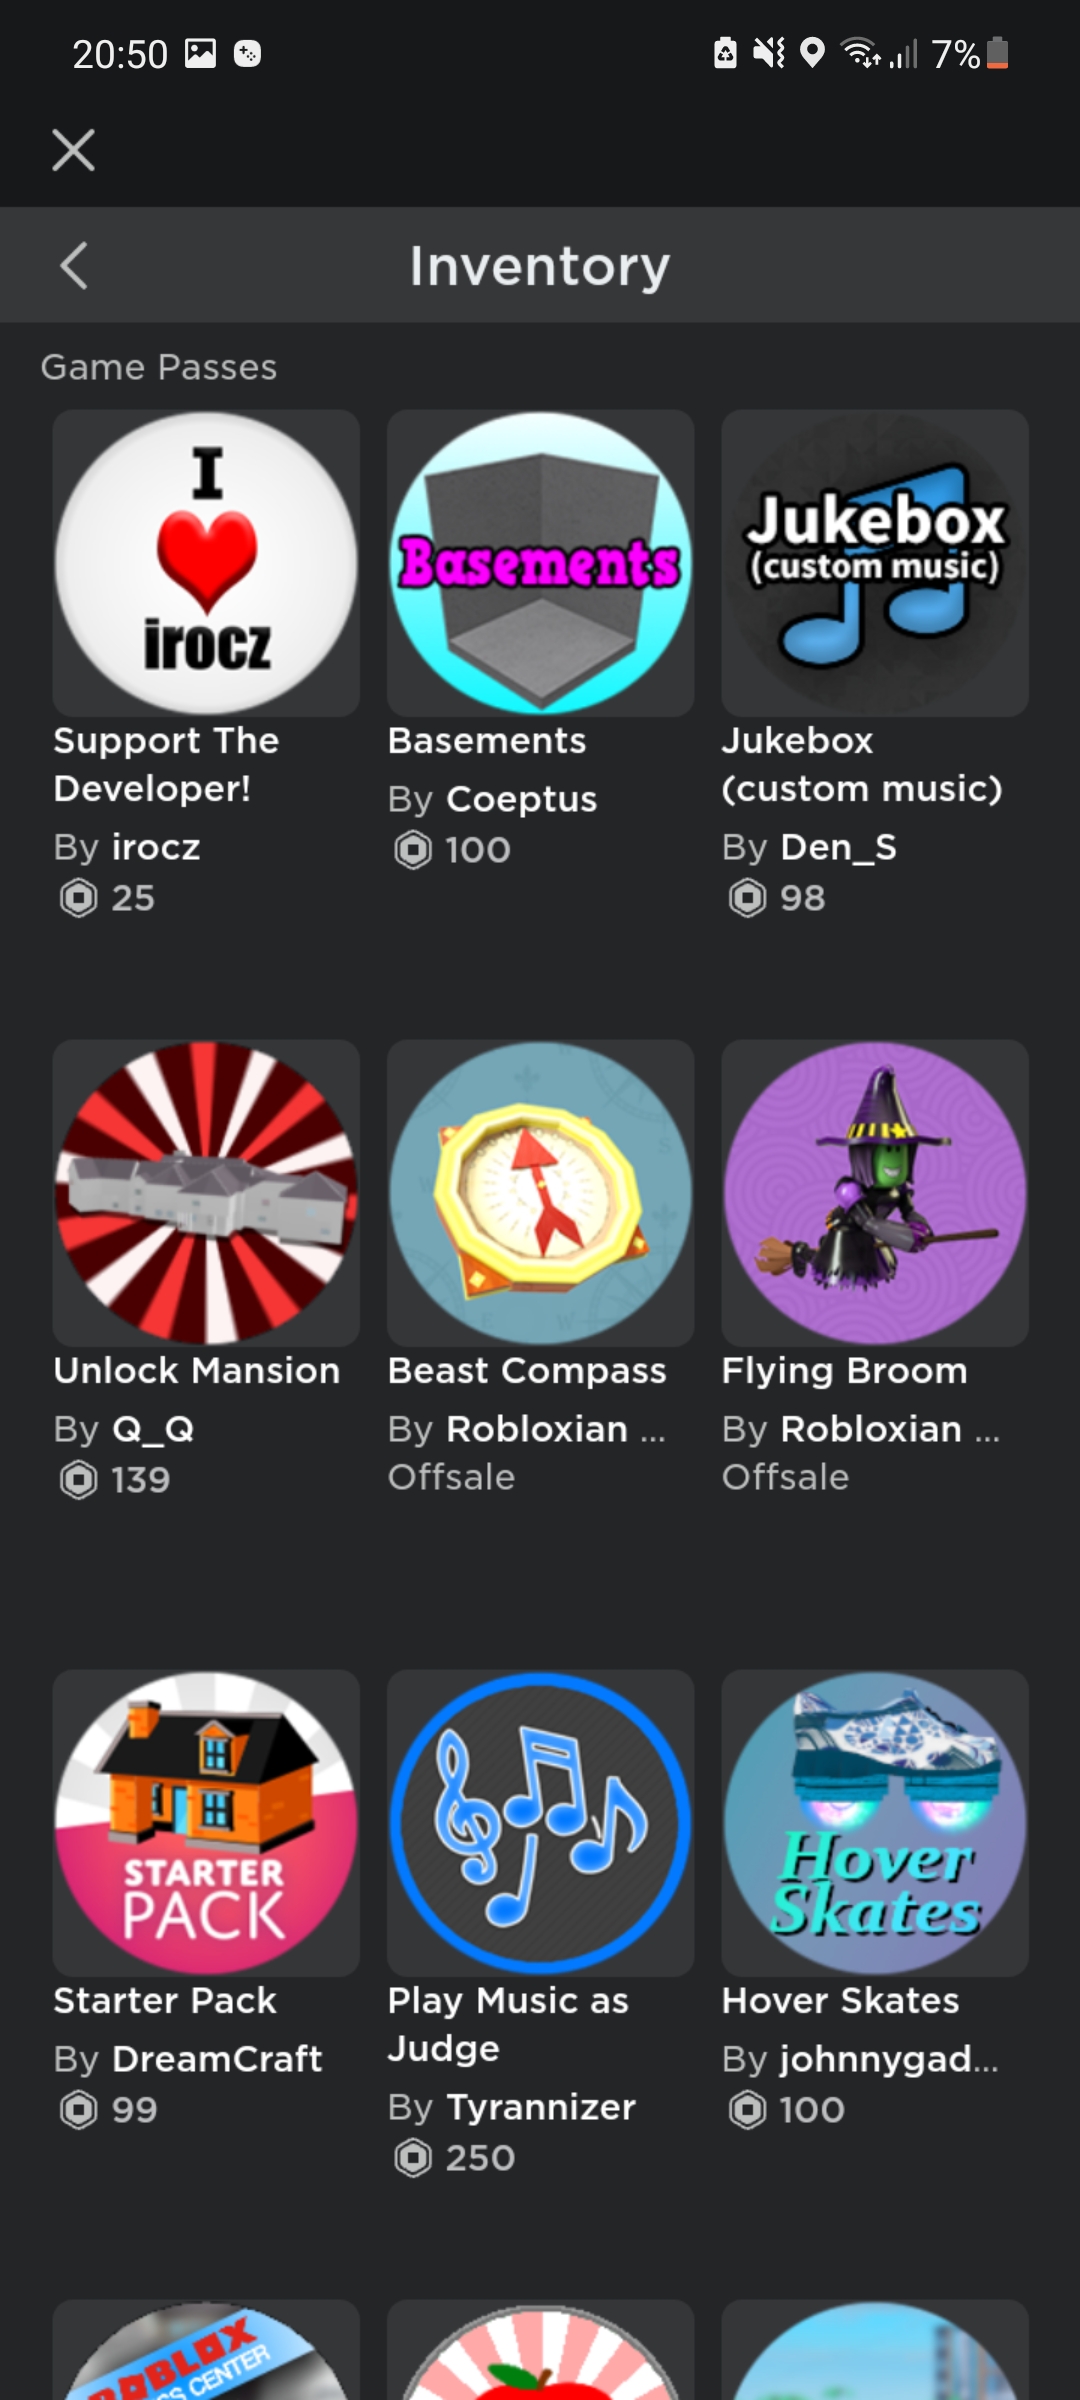 Sold Sale 150 Selling 2015 Retro Roblox Account Loads Of Shirts And Accessories Epicnpc Marketplace - roblox coeptus inventory